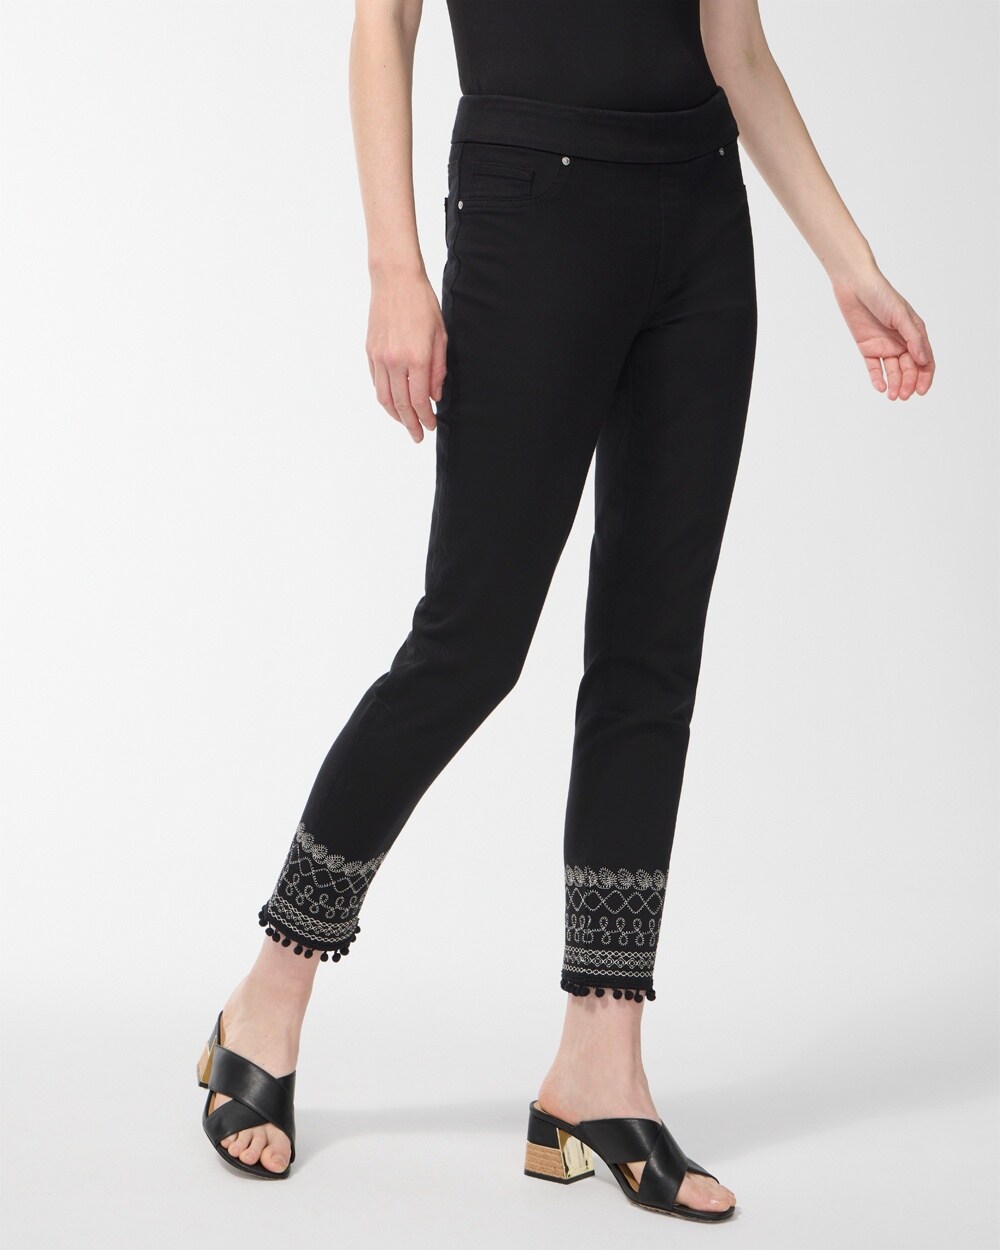 Embroidered Black Pull-On Ankle Jeggings